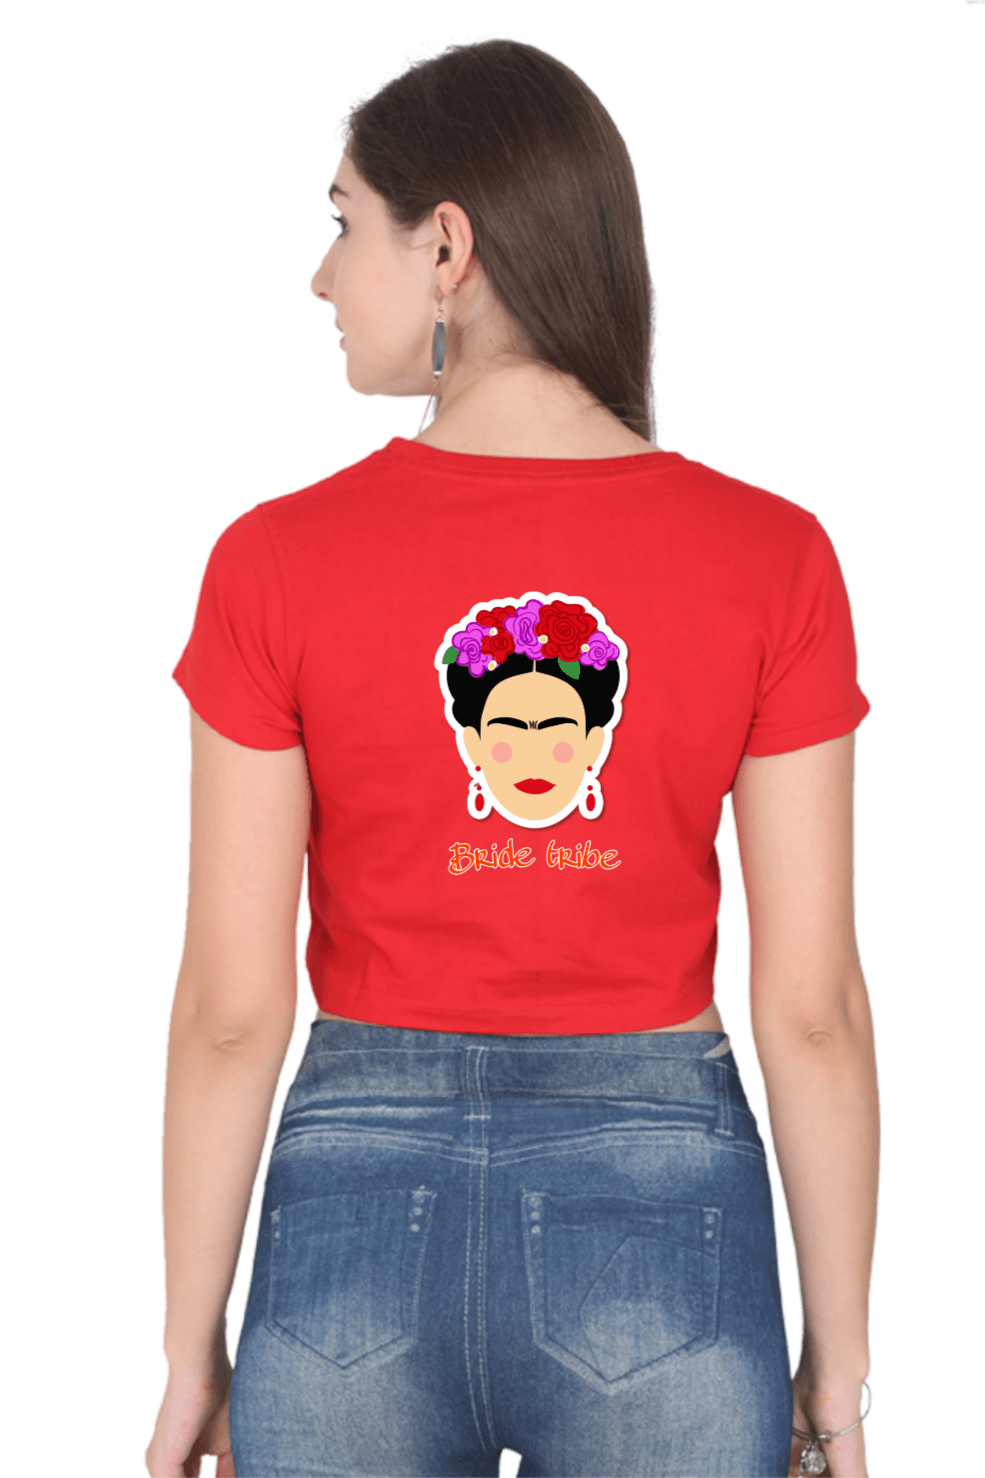 Red Crop T-shirt printed with Bride Tribe 